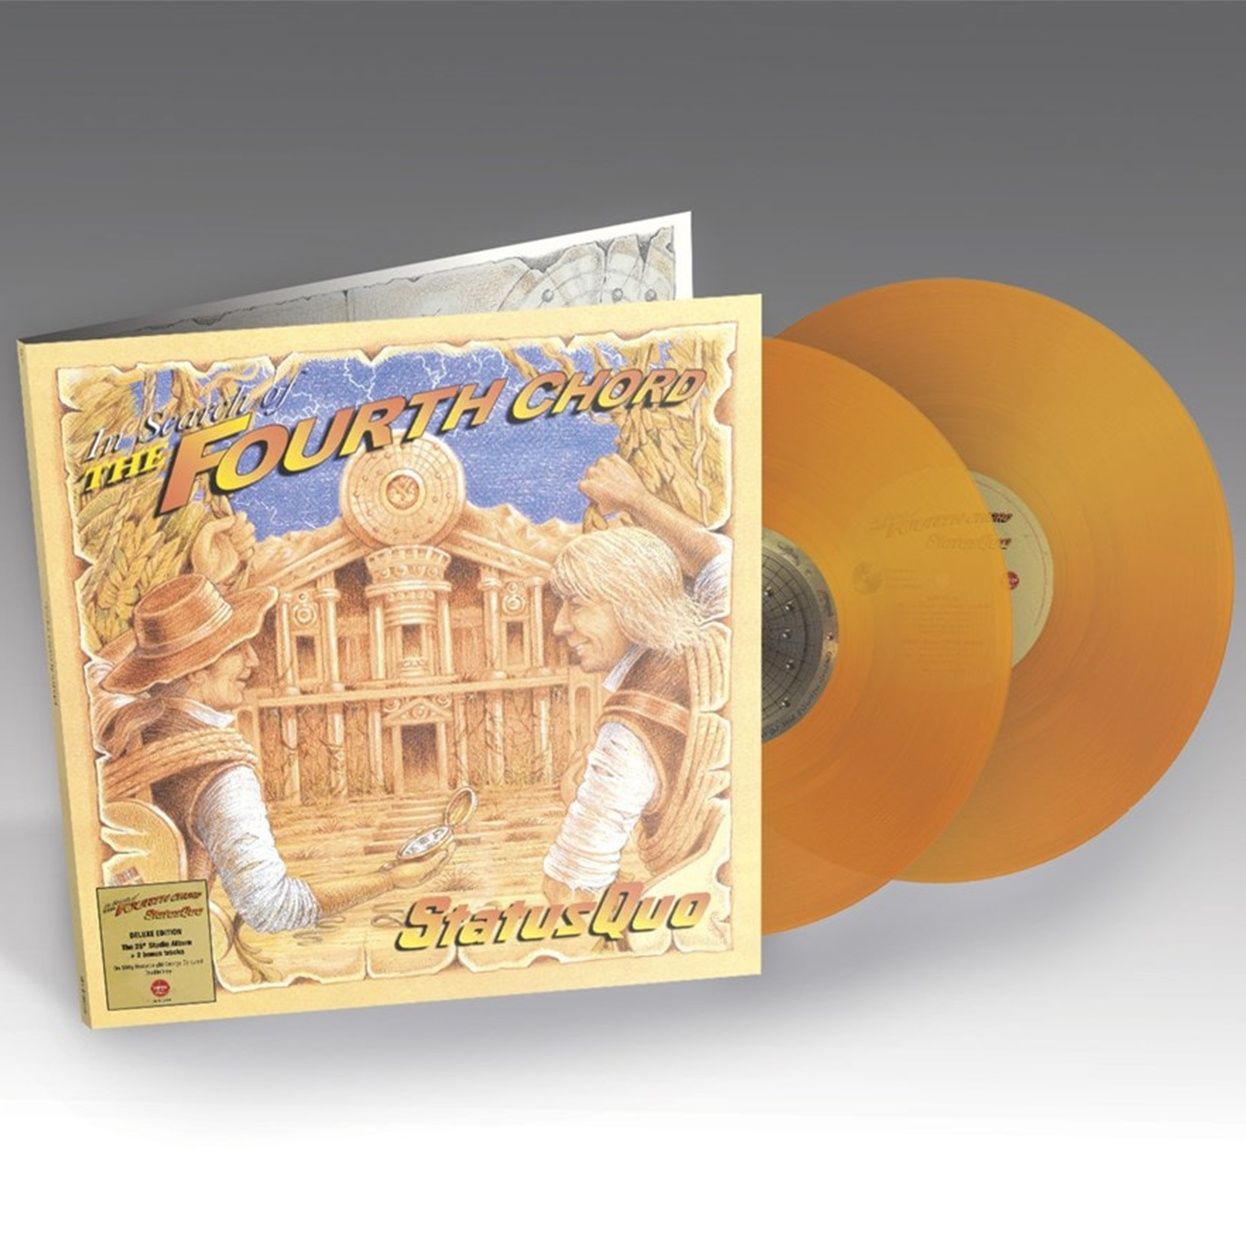 Status Quo - In Search Of The Fourth Chord: Limited Orange Vinyl 2LP